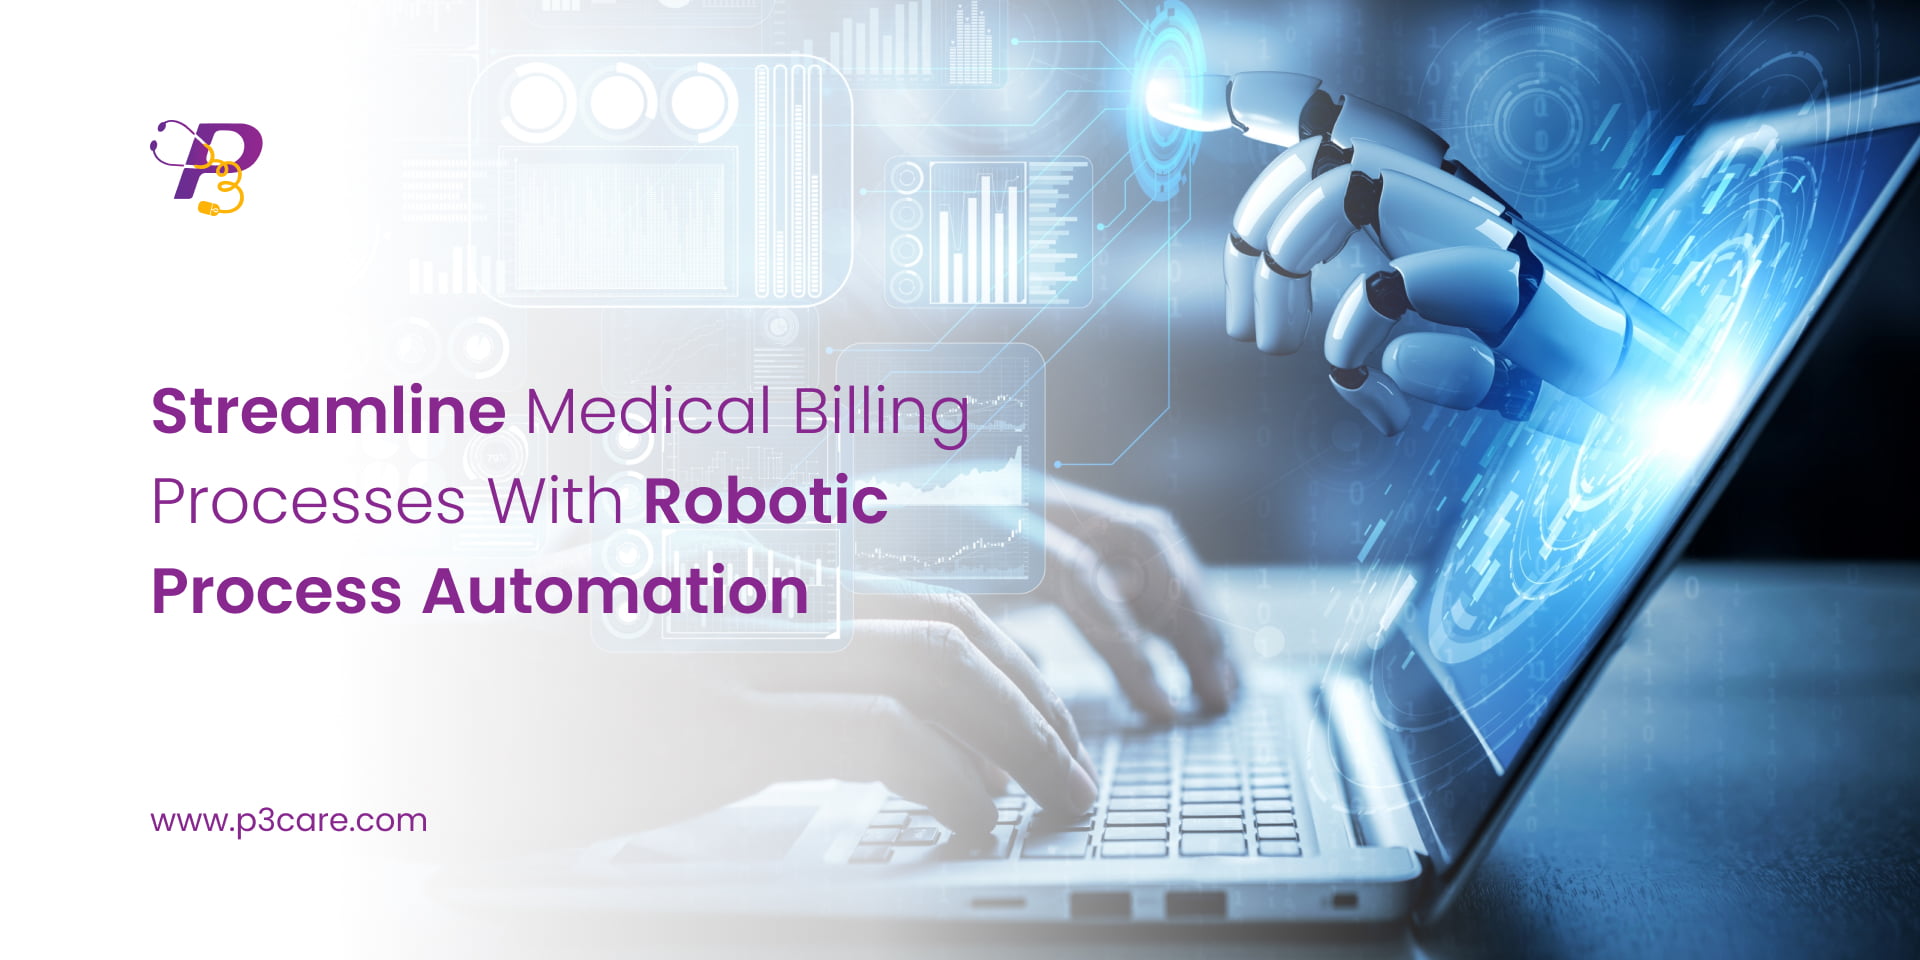 Streamline Medical Billing Processes with Robotic Process Automation